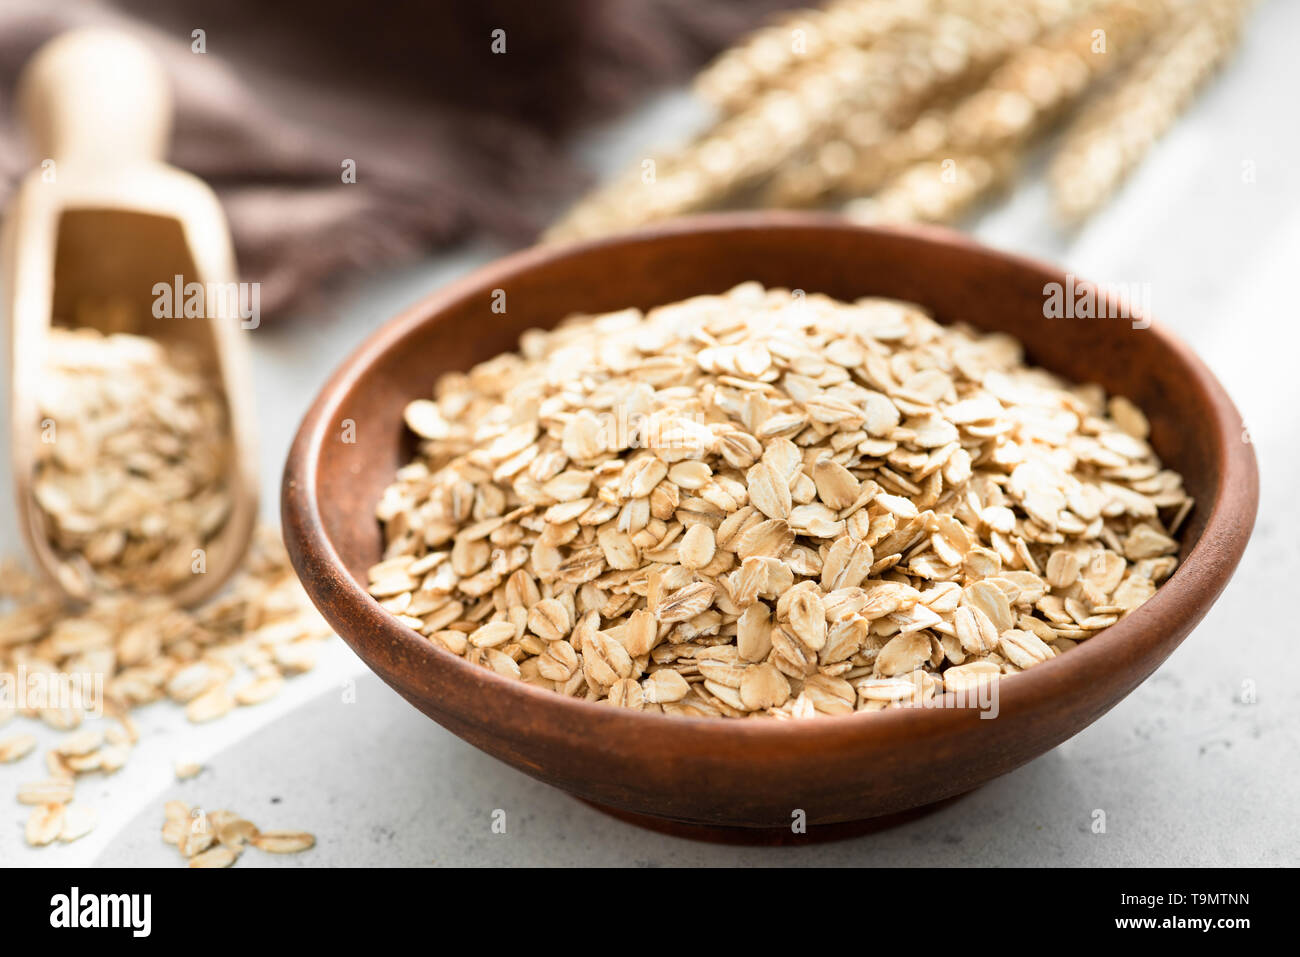 Oat flakes, rolled oats in bowl. Dry breakfast cereals. Healthy eating, healthy lifestyle concept Stock Photo